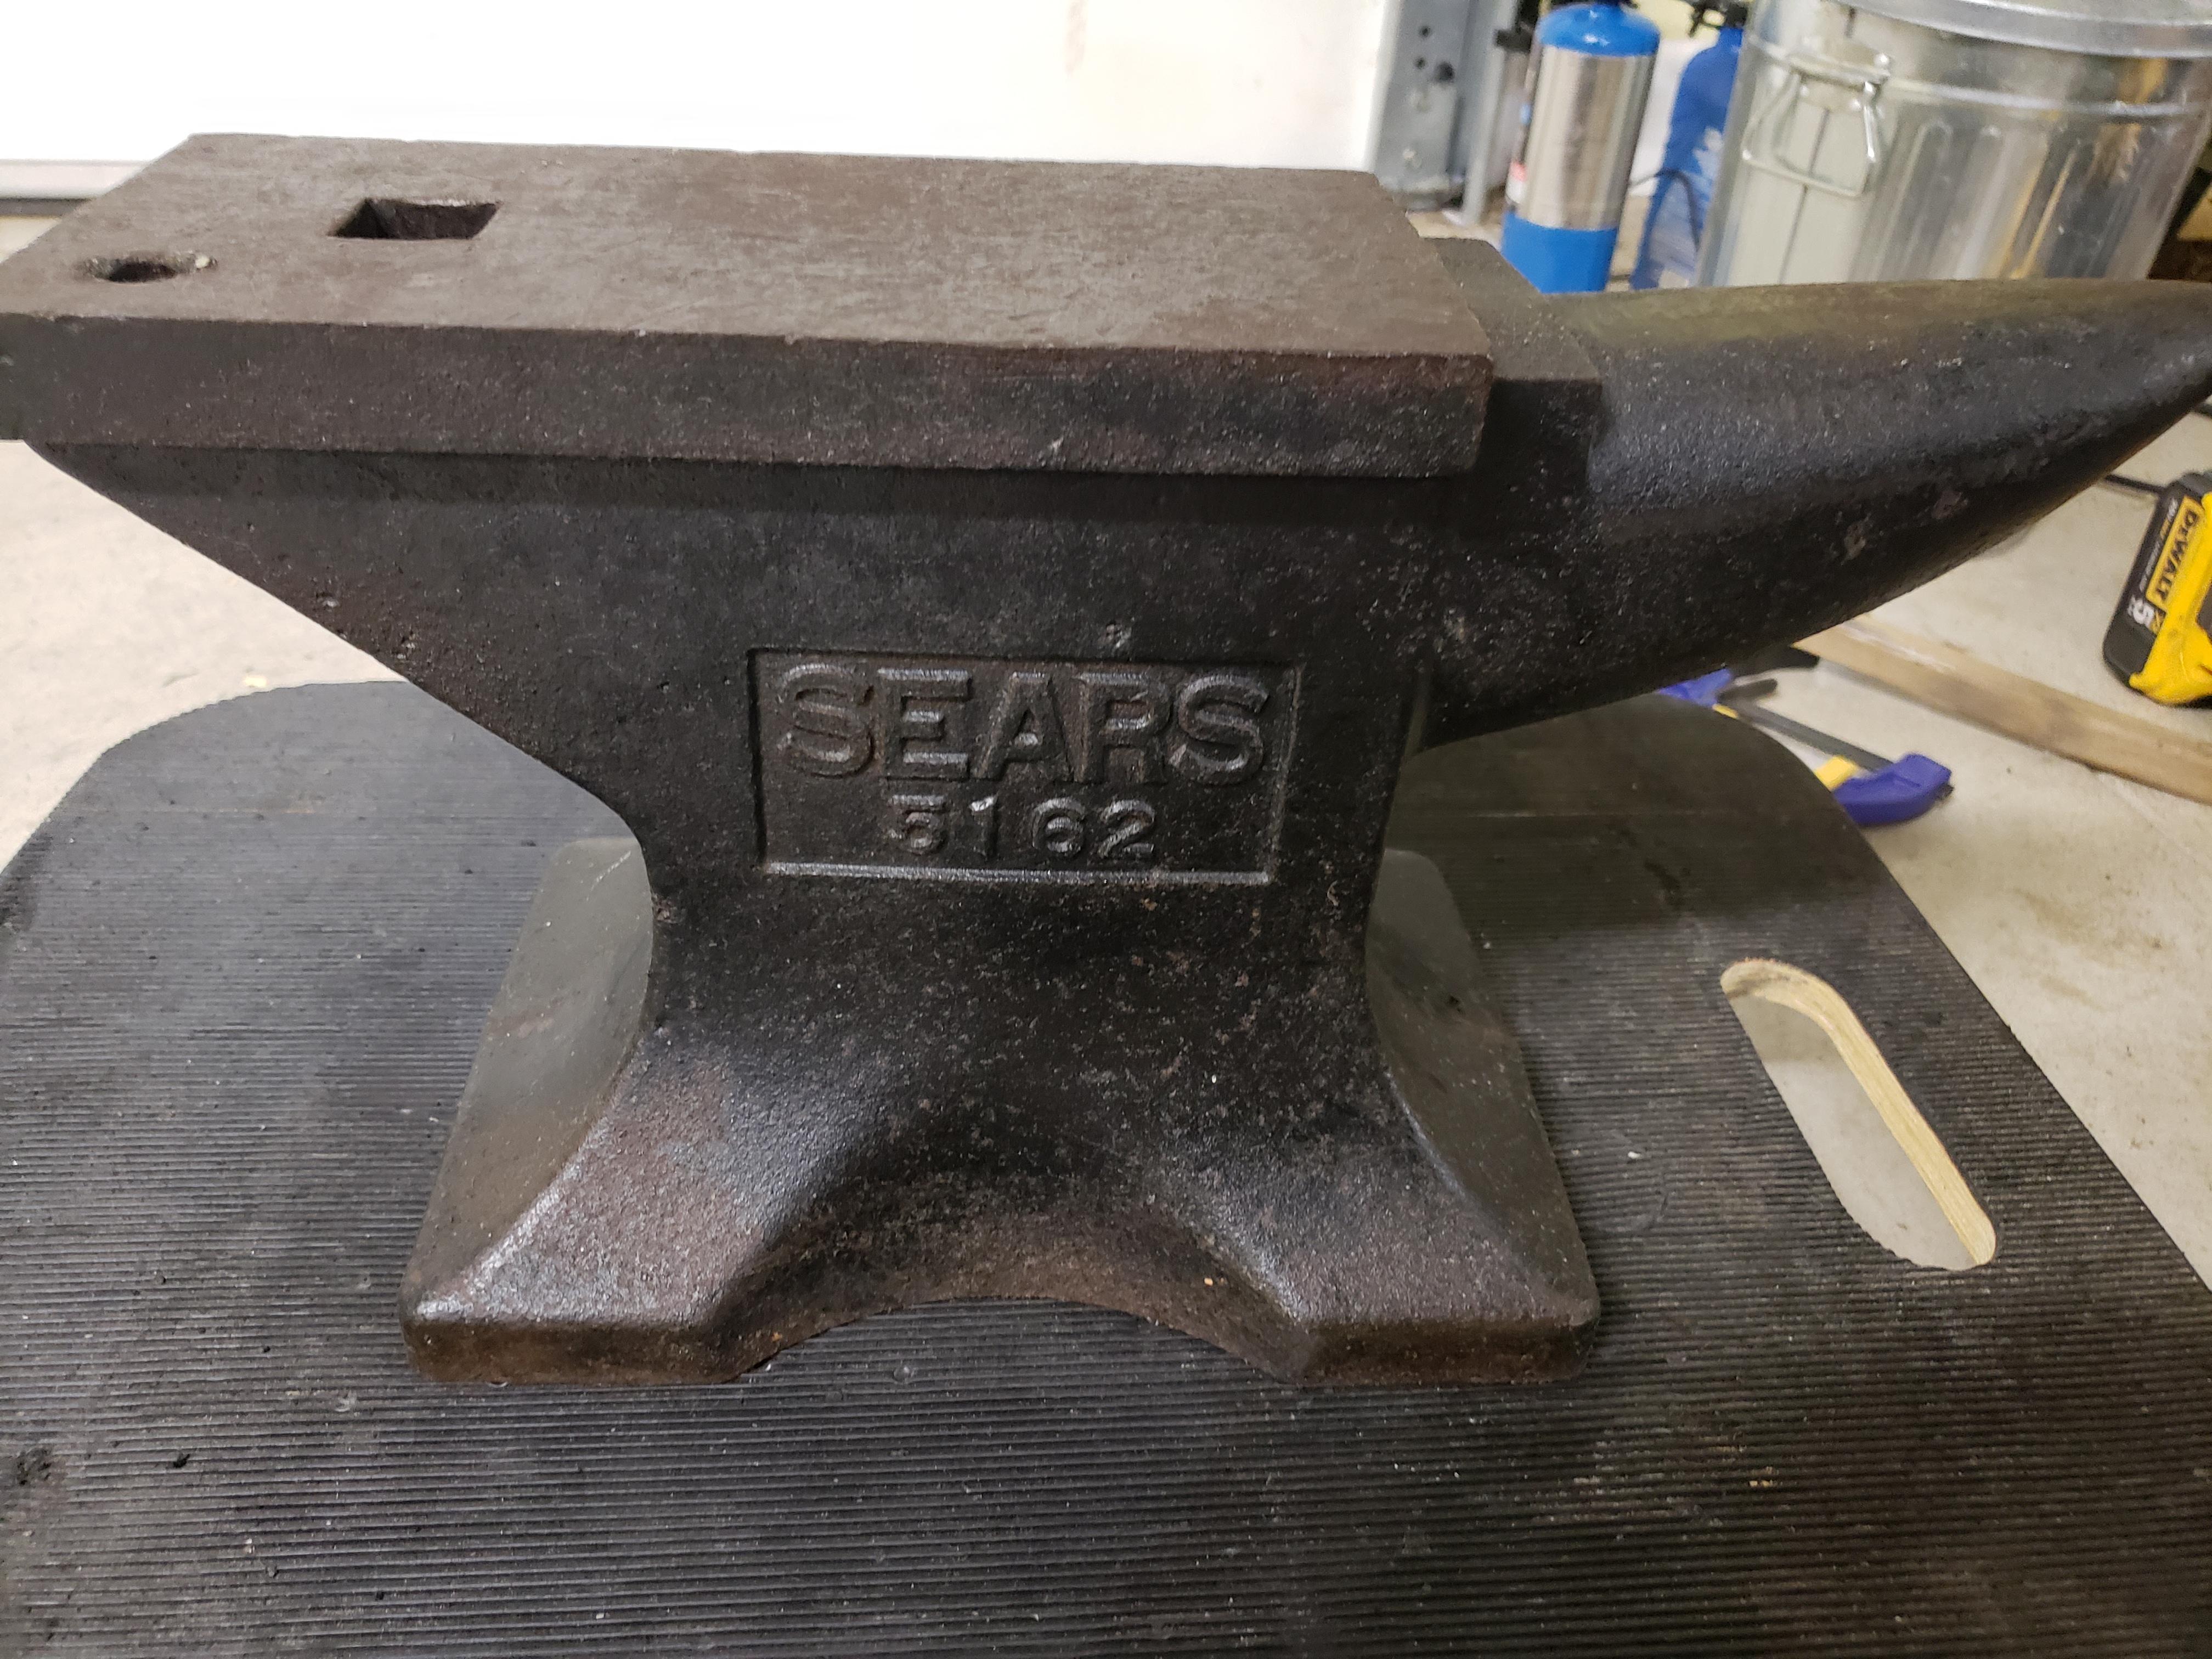 100 lb anvil yesterday, and I am having trouble finding any information abo...